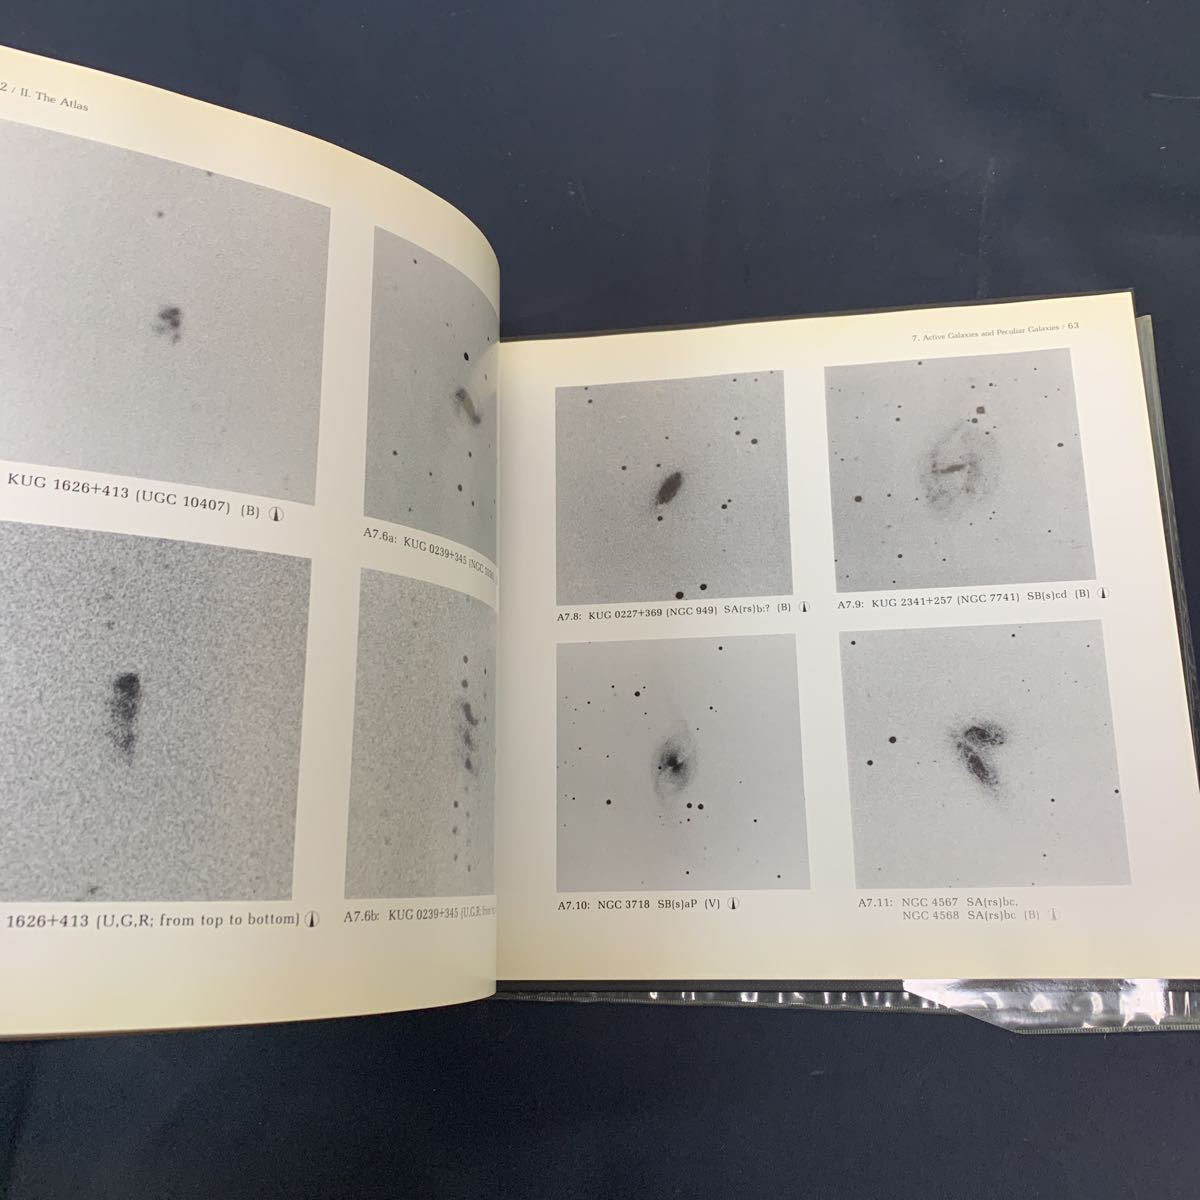 ★An Atlas of Selected Galaxies With Illustrations of Photometric Analyses レア 希少 天体 銀河 アトラス 東京大学出版会 古本 古書★_画像6